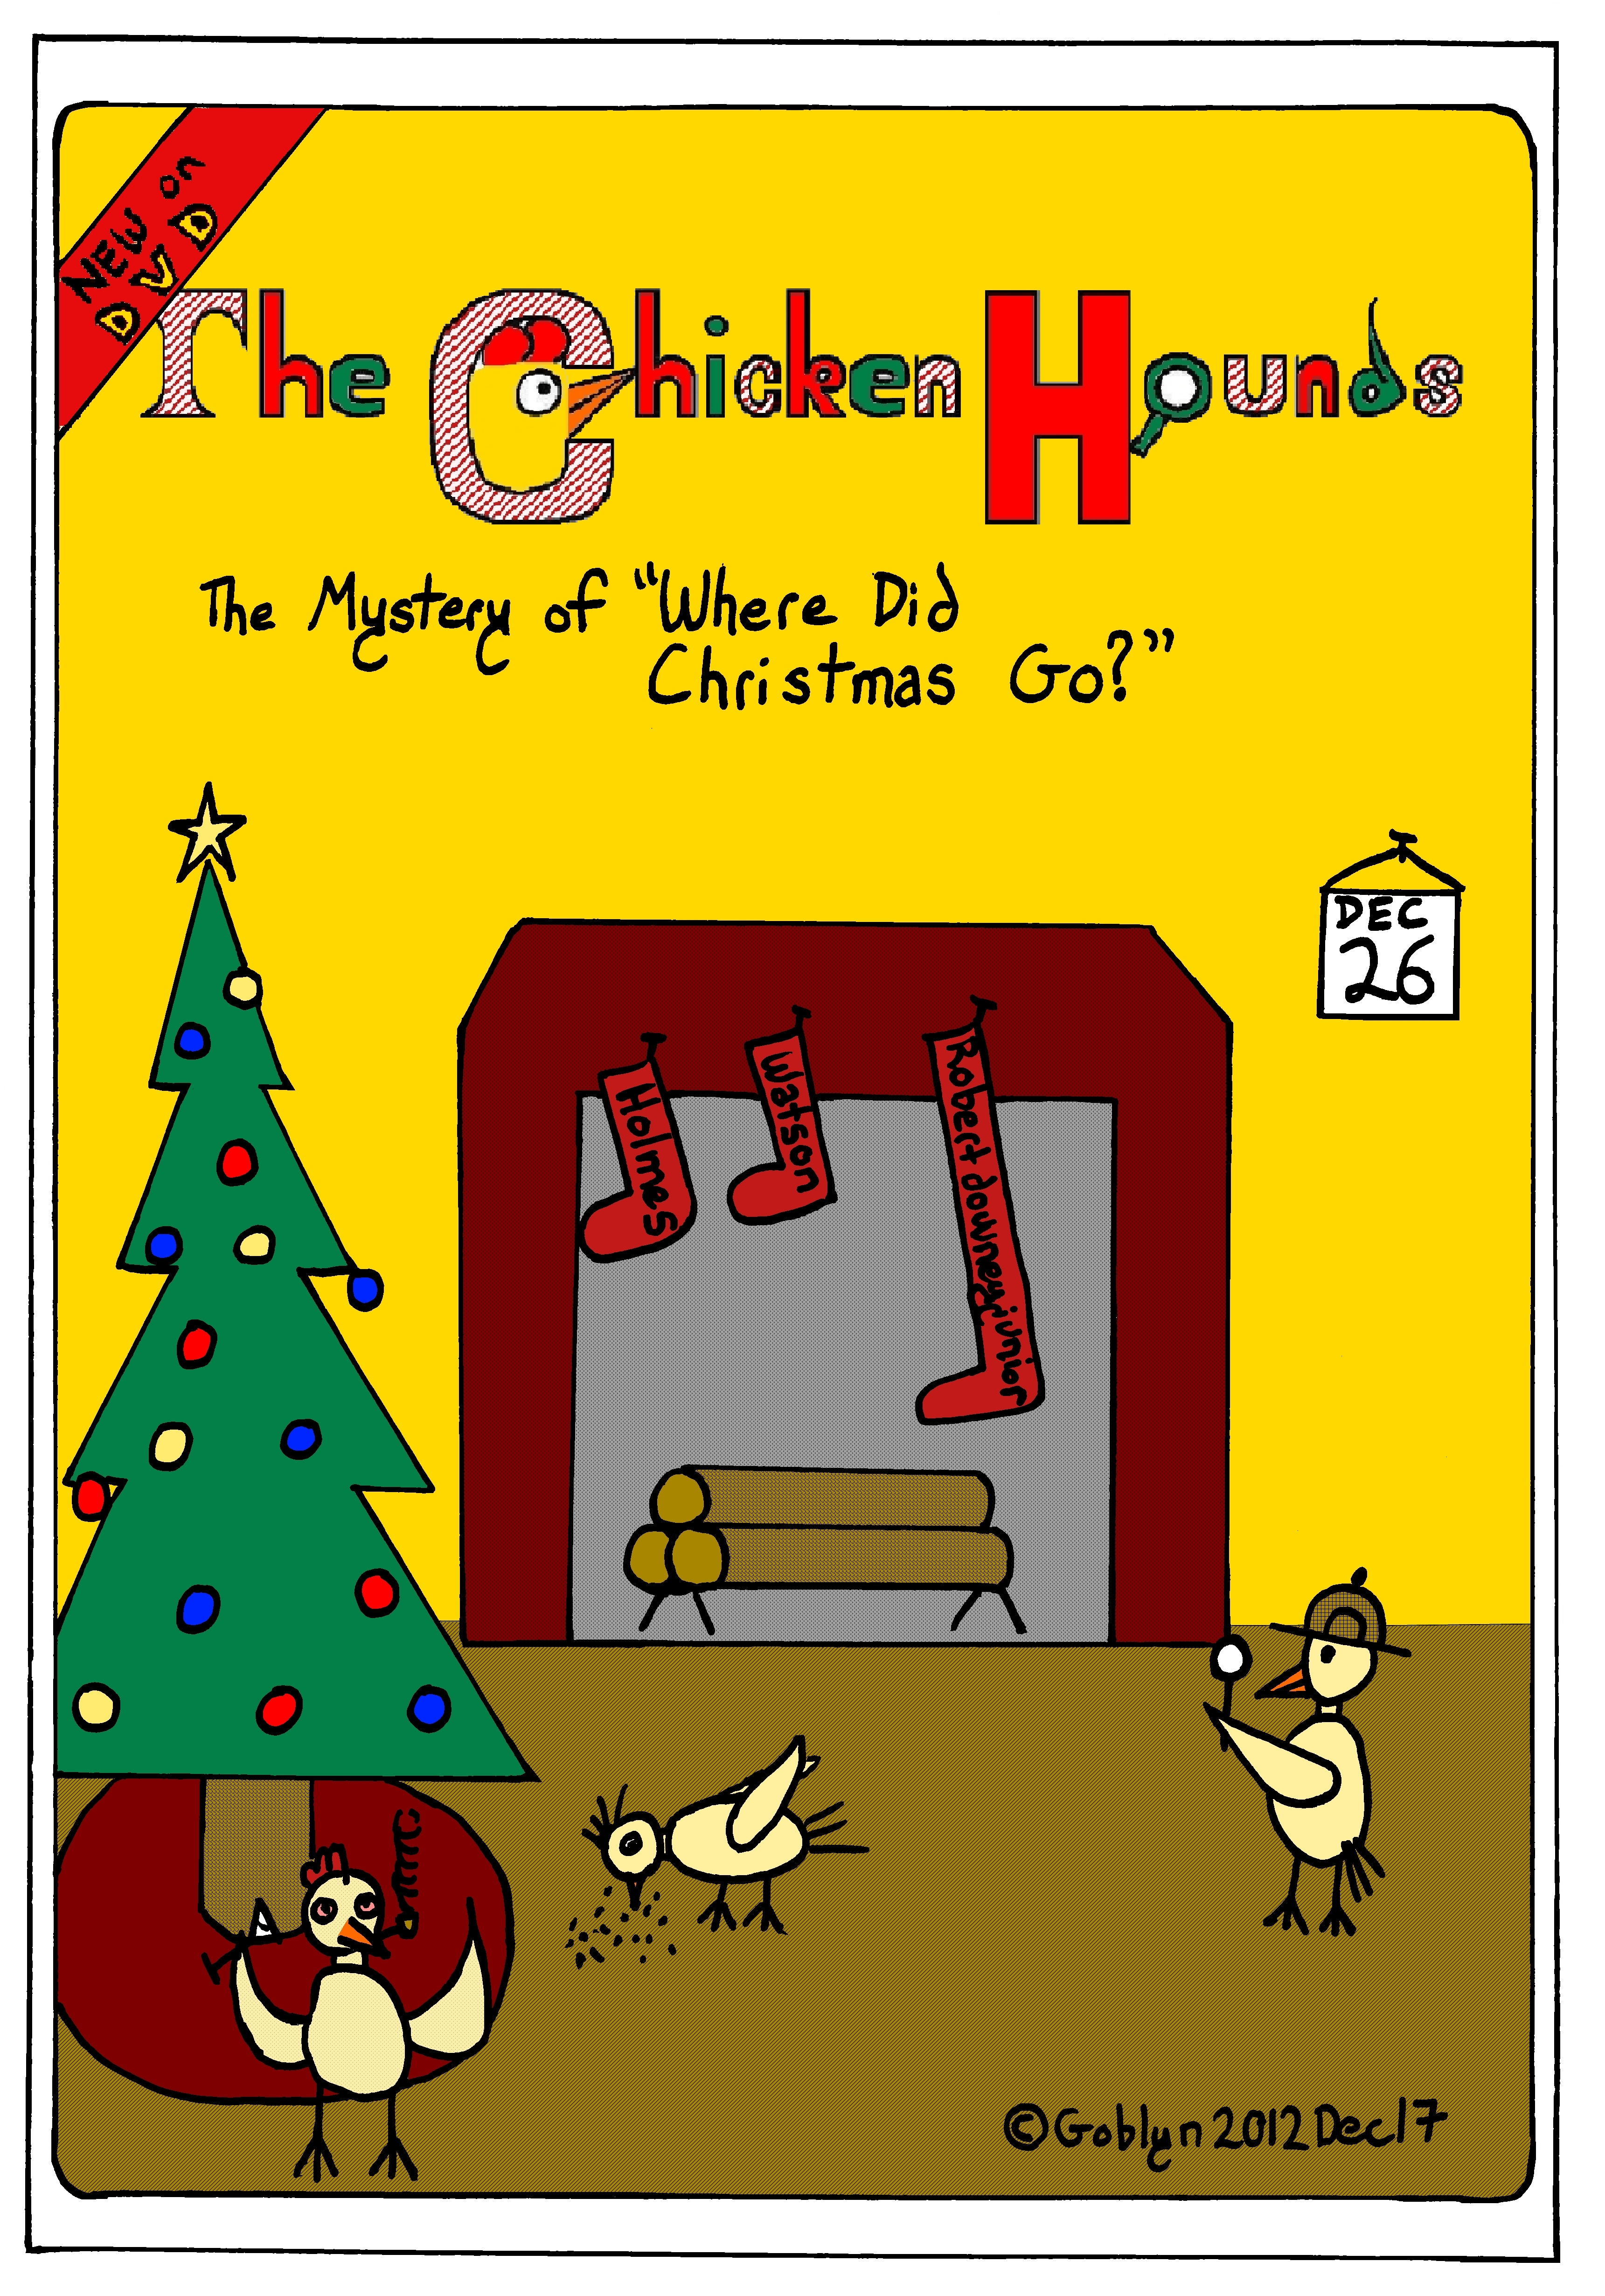 The Chicken Hounds, San Francisco's Greatest Detectives, in the Mystery of "Where Did Christmas Go?"